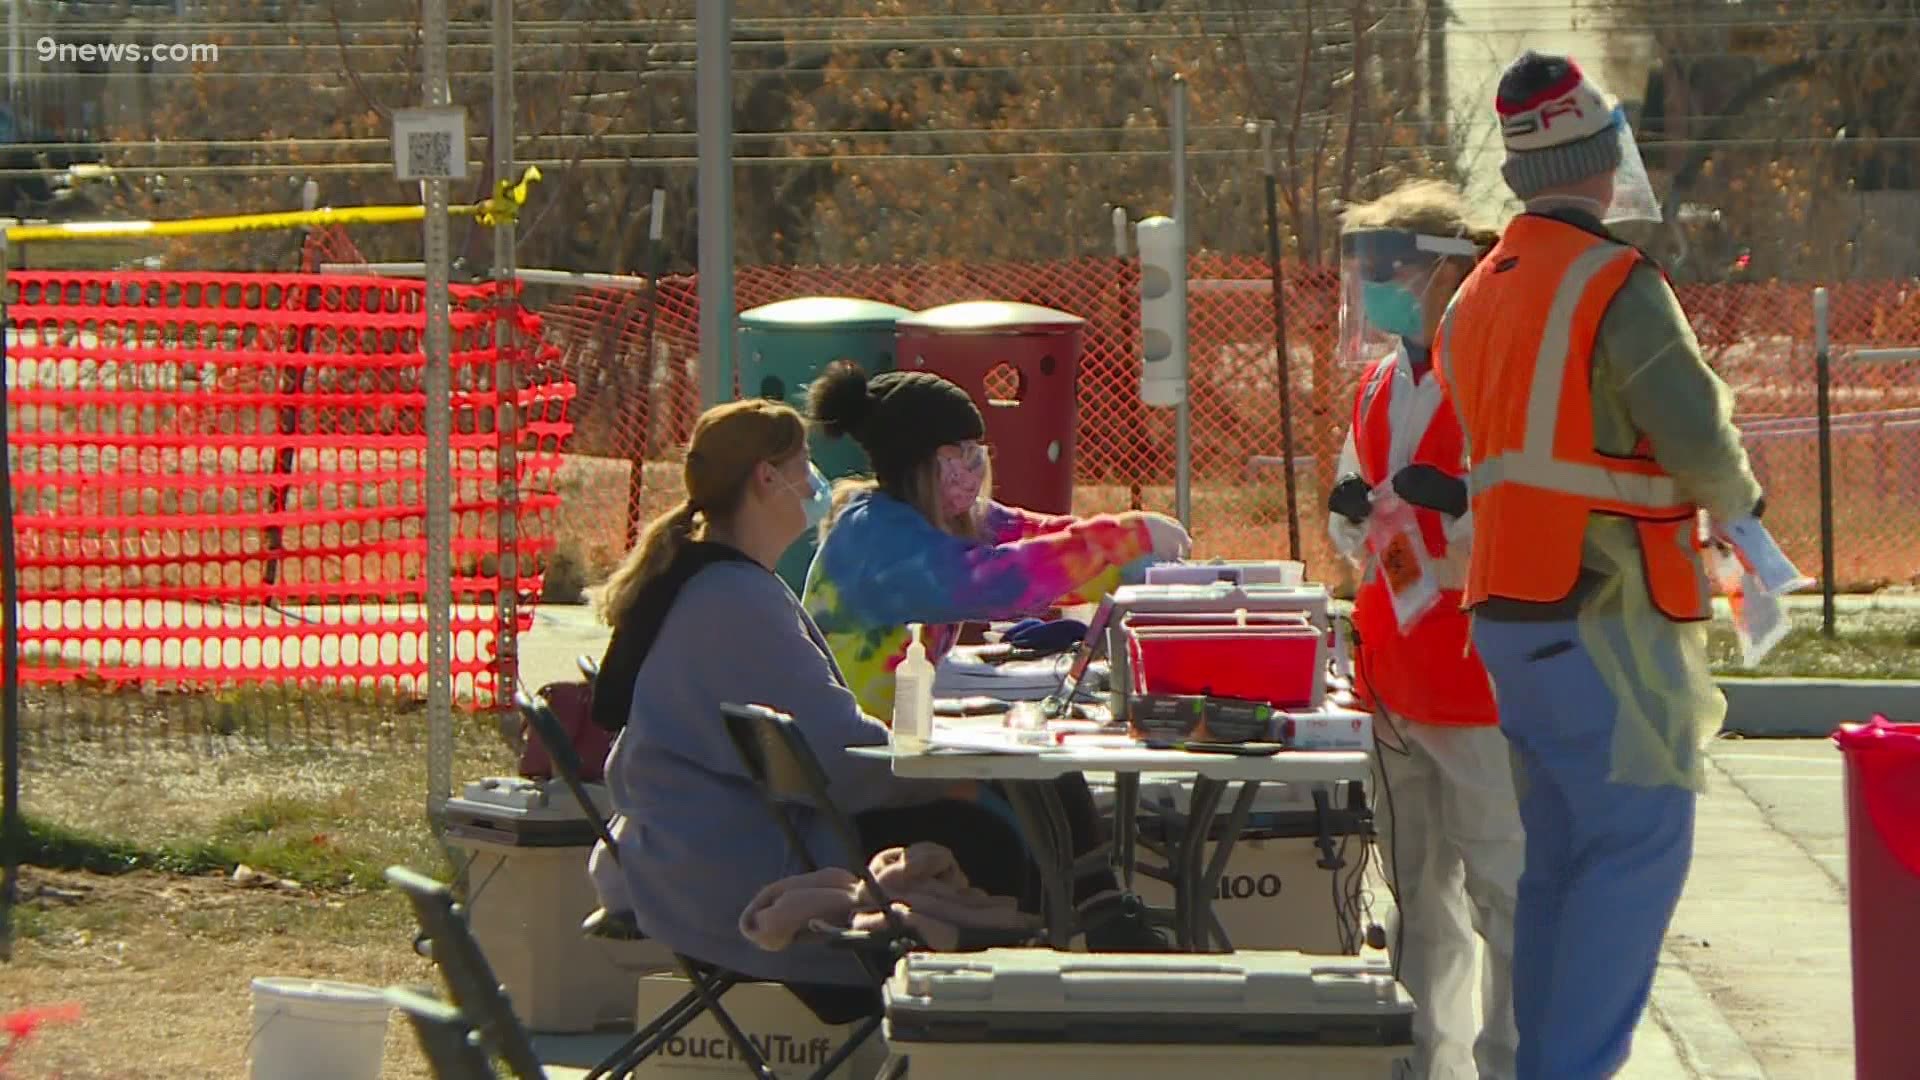 Denver's fourth community testing site for COVID-19 opened Monday morning at Ruby Hill Park. It closed at 1:30 p.m.